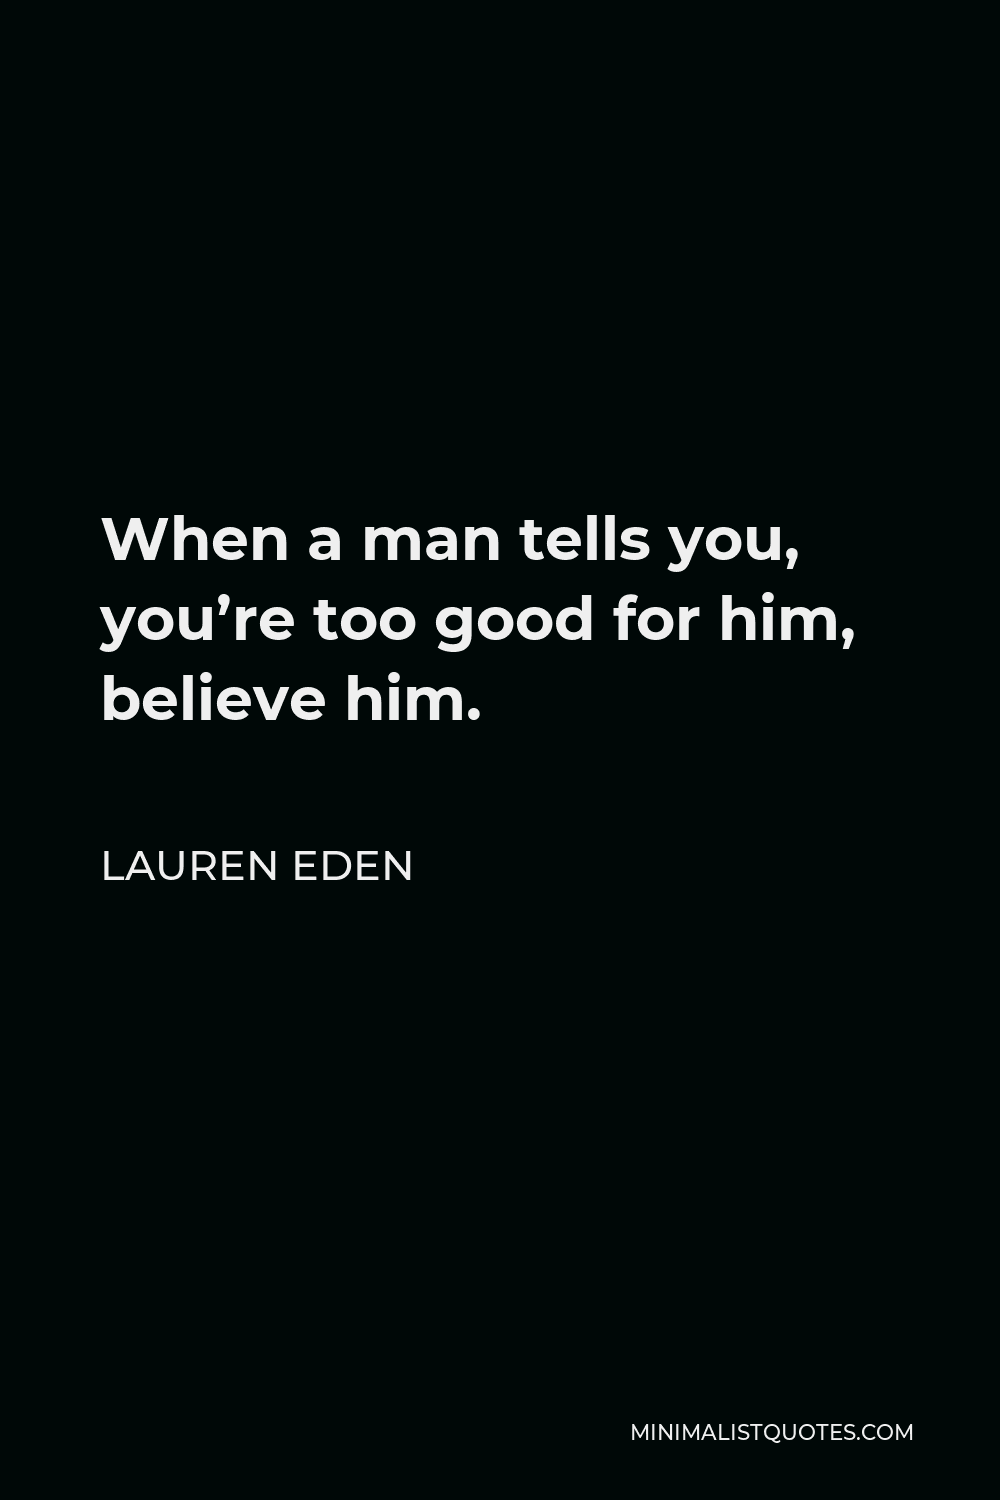 Lauren Eden Quote: When a man tells you, you’re too good for him ...